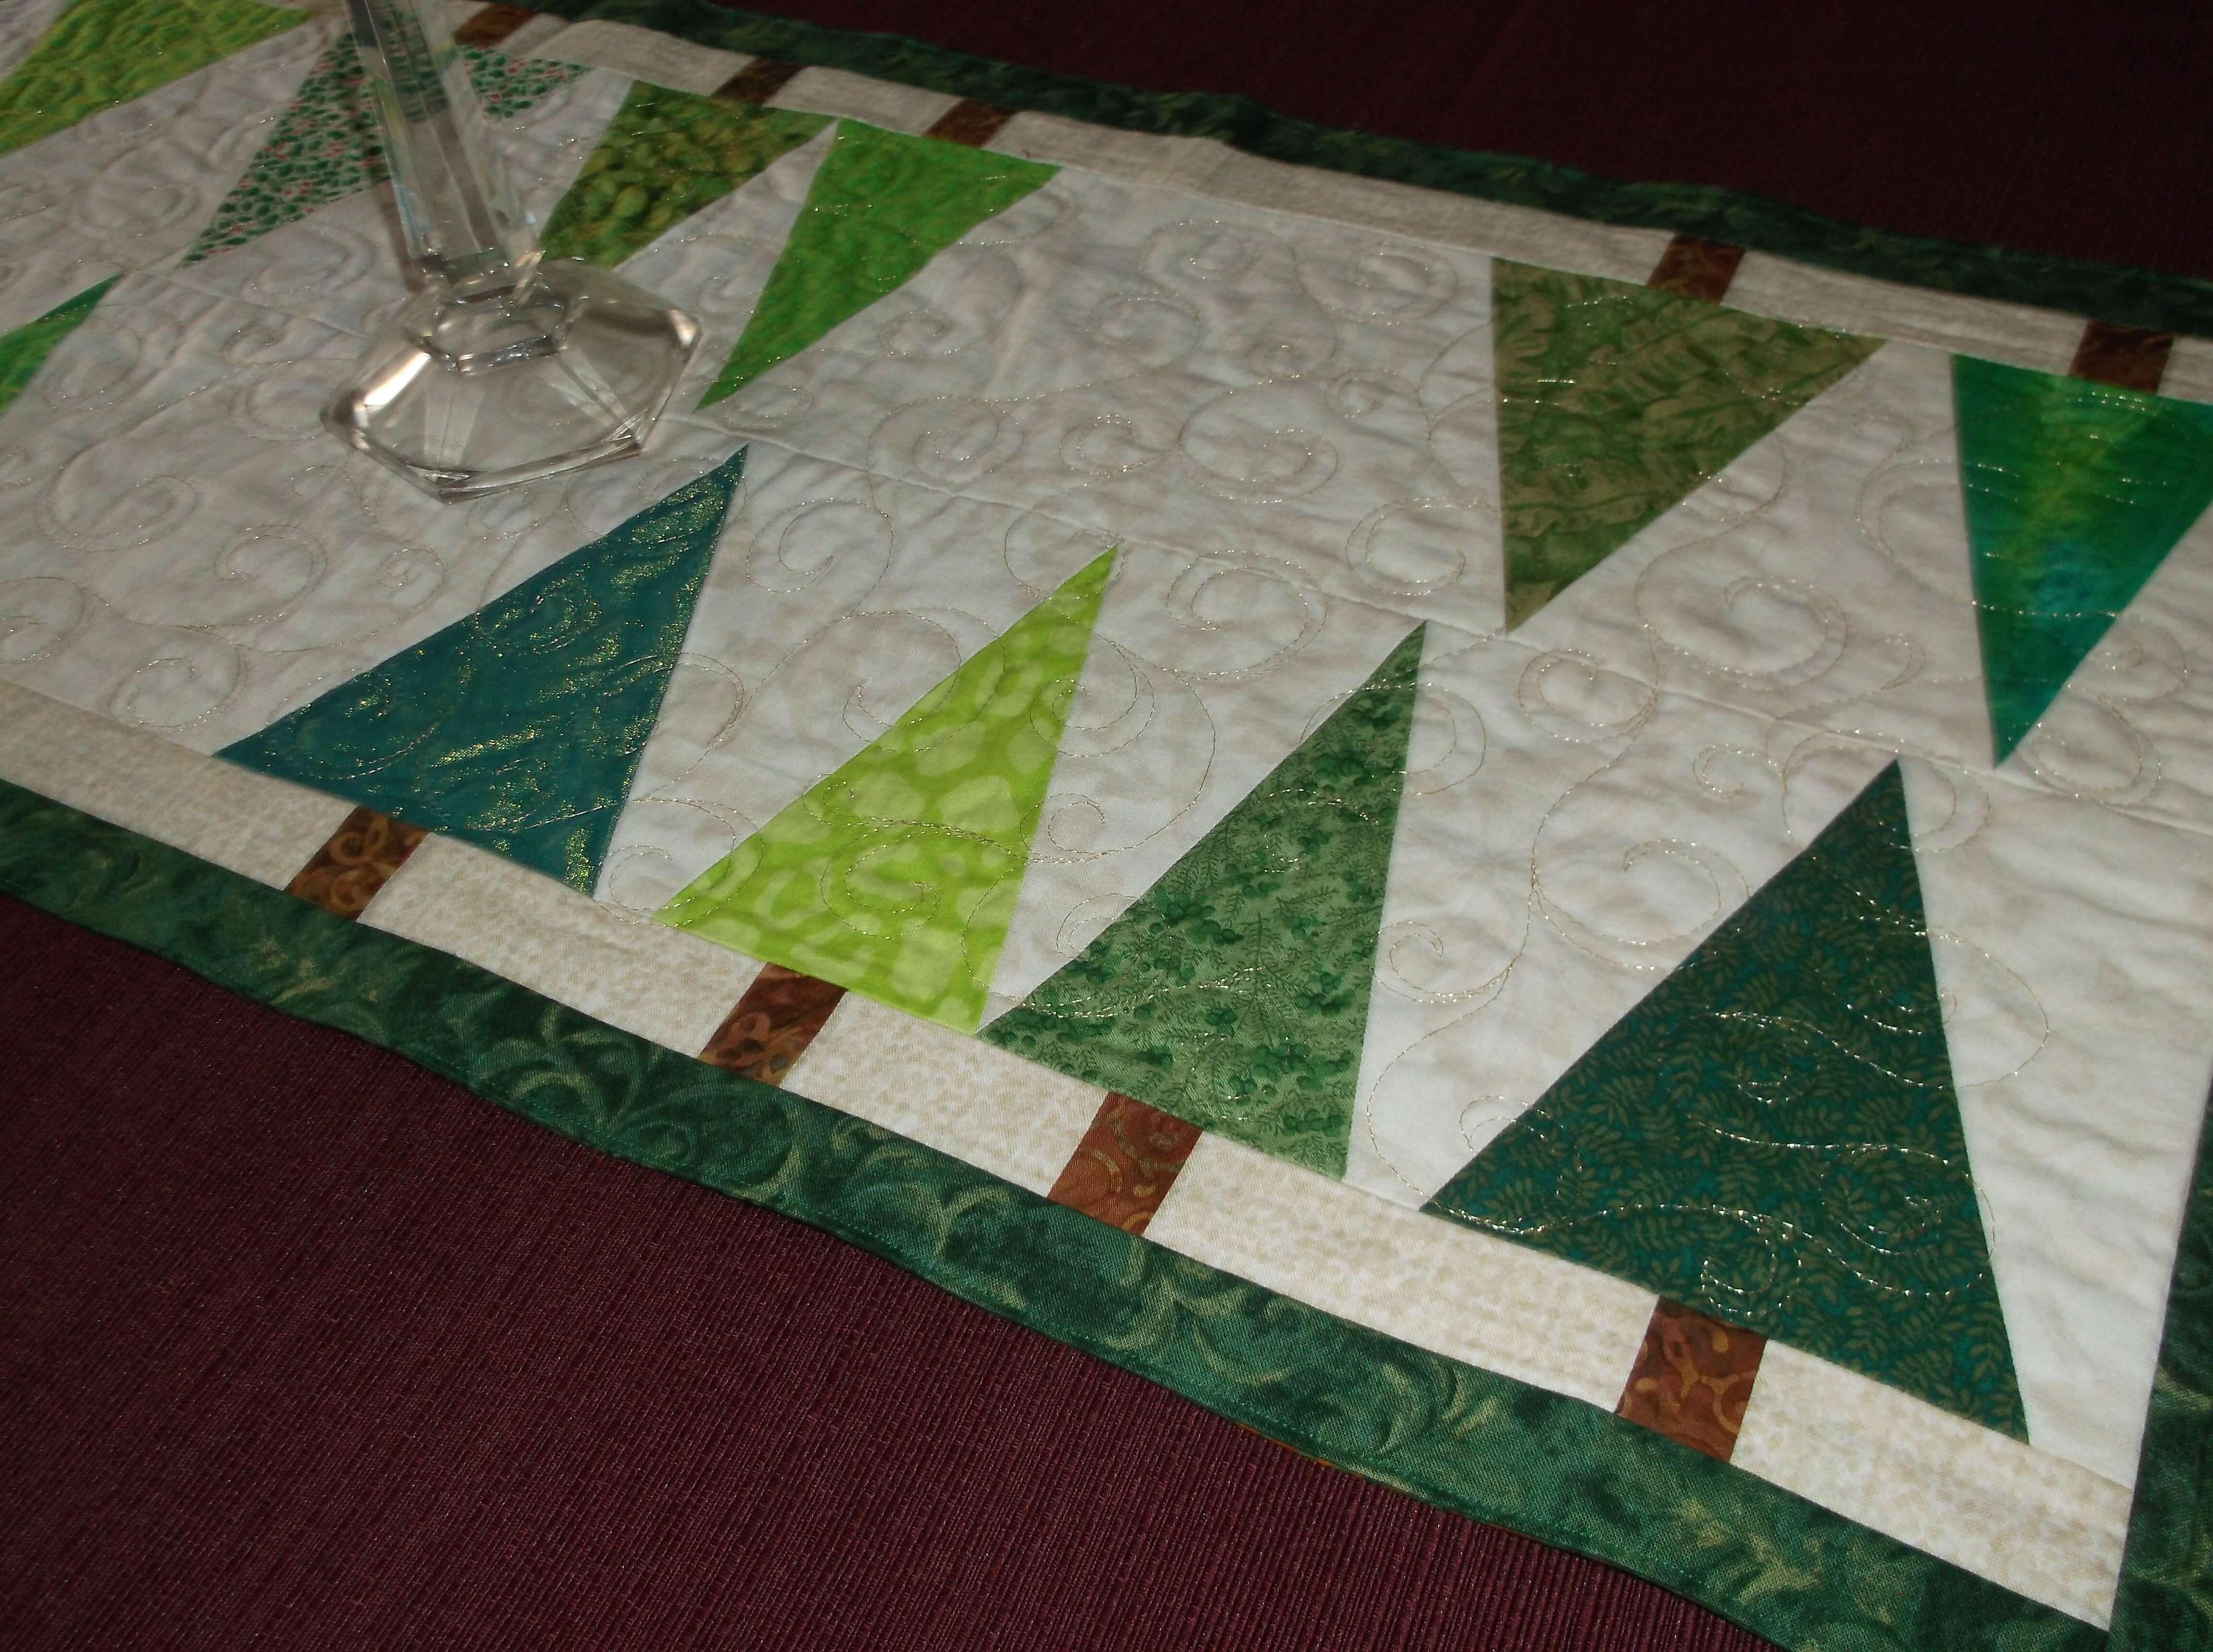 Christmas Table Runner, Reversible, Fall colors on reverse, green trees, white/cream, brown, rust, gold, by Amy Krasnansky